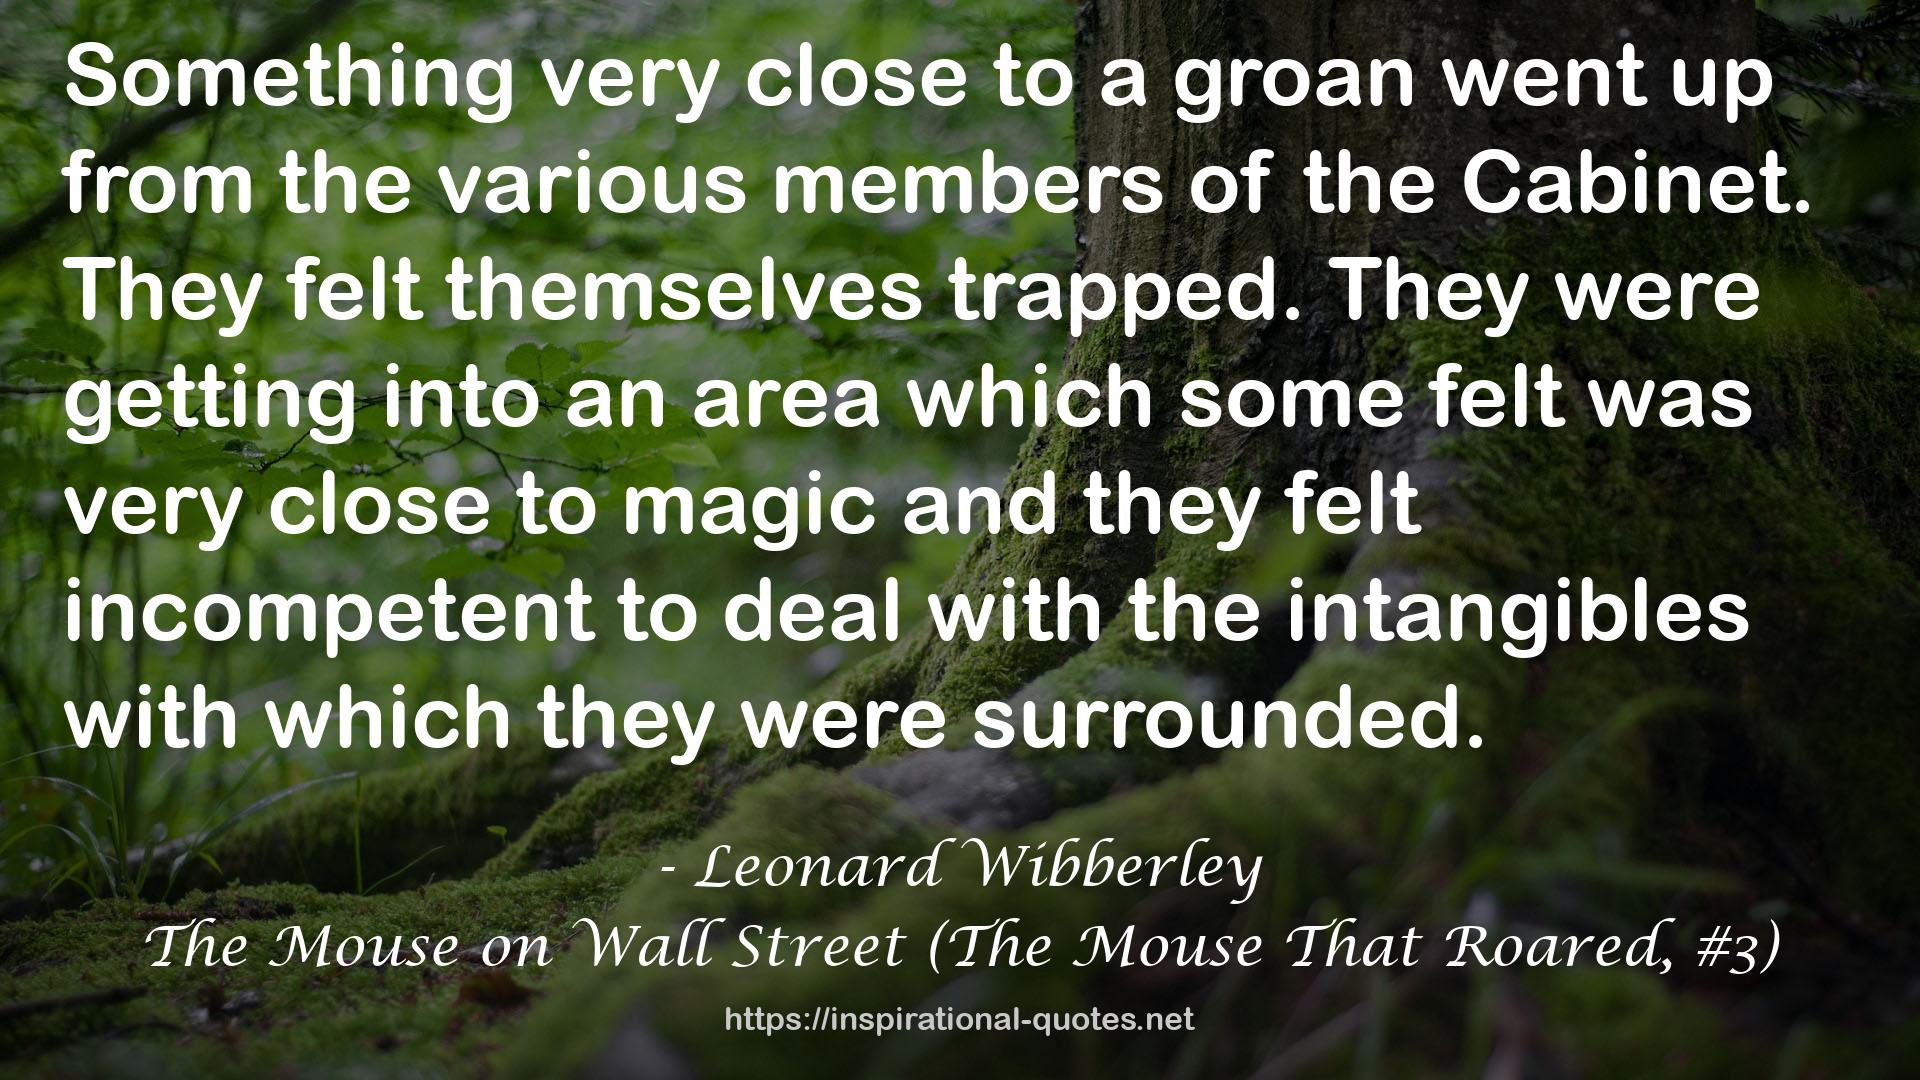 The Mouse on Wall Street (The Mouse That Roared, #3) QUOTES